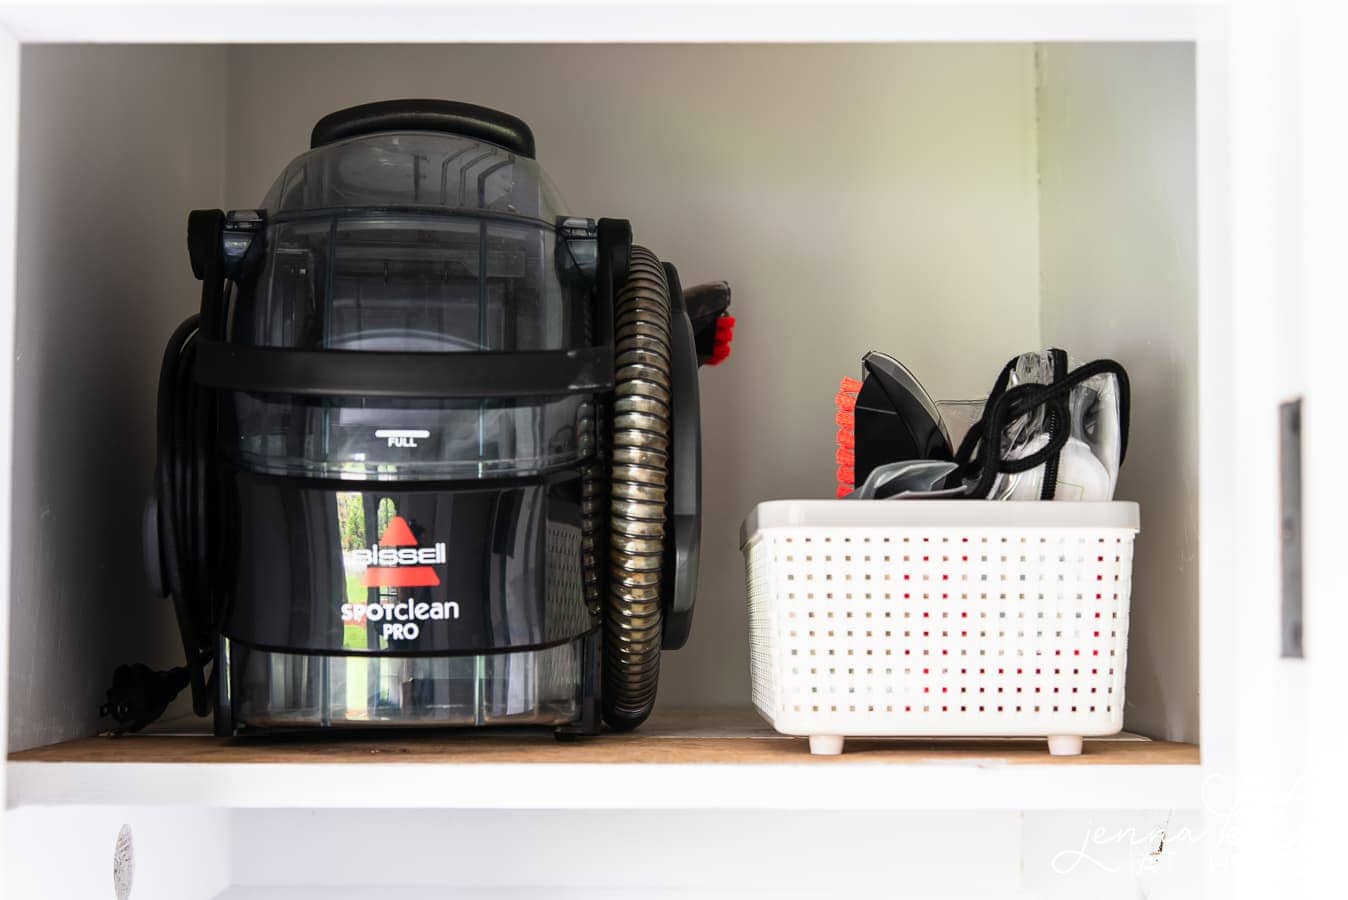 The new top shelf holding a vacuum canister and smaller parts of a vacuum in a white basket